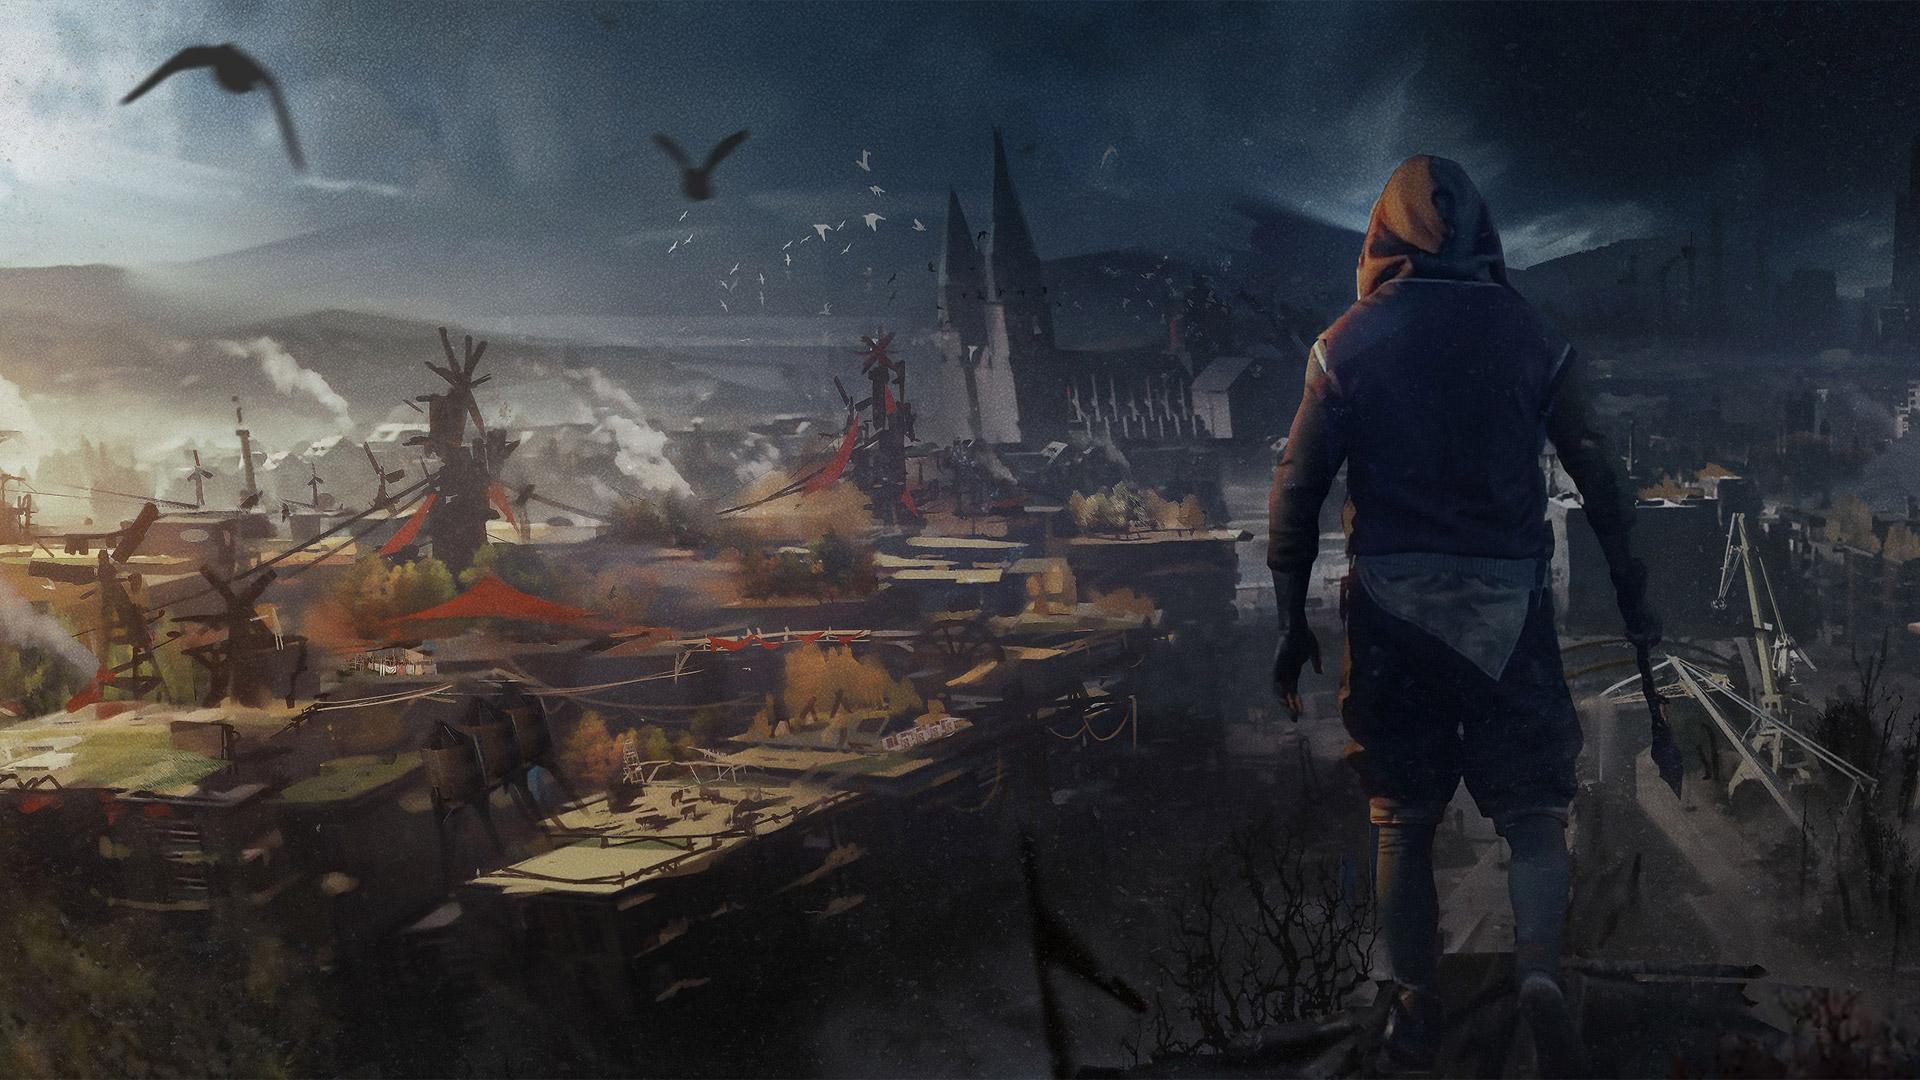 Free Dying Light 2 Wallpaper in 1920x1080